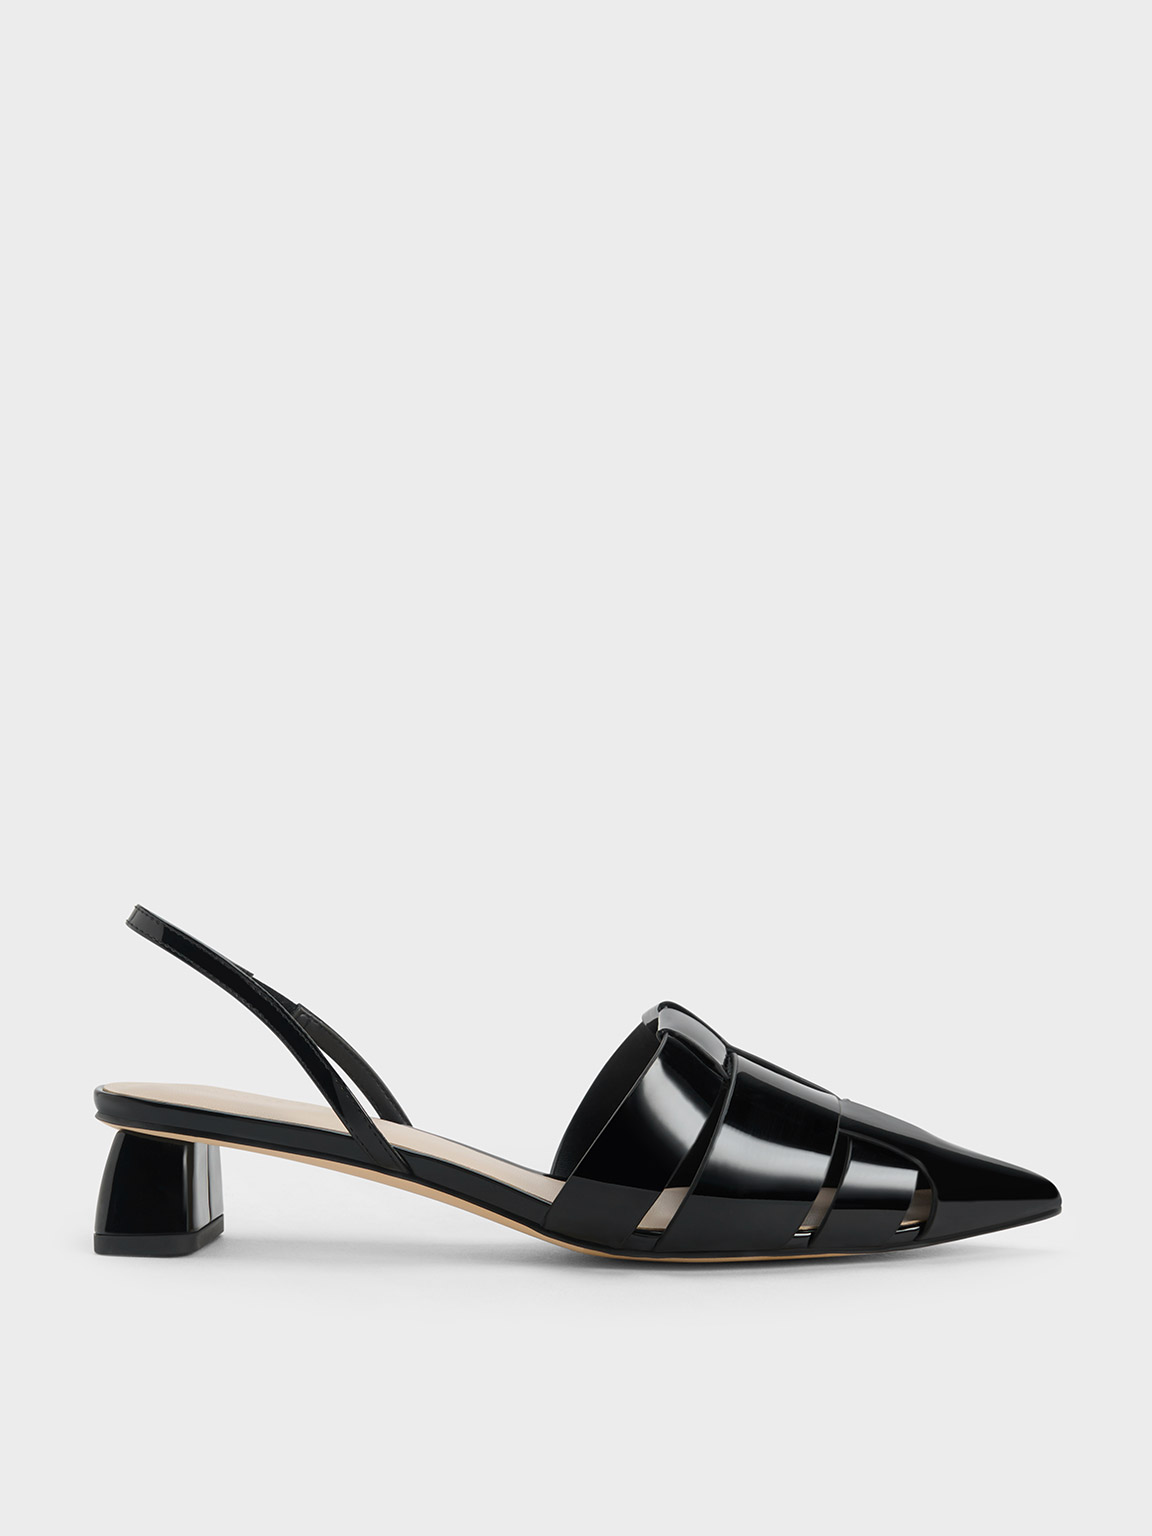 Charles & Keith Interwoven Patent Slingback Pumps In Black Patent